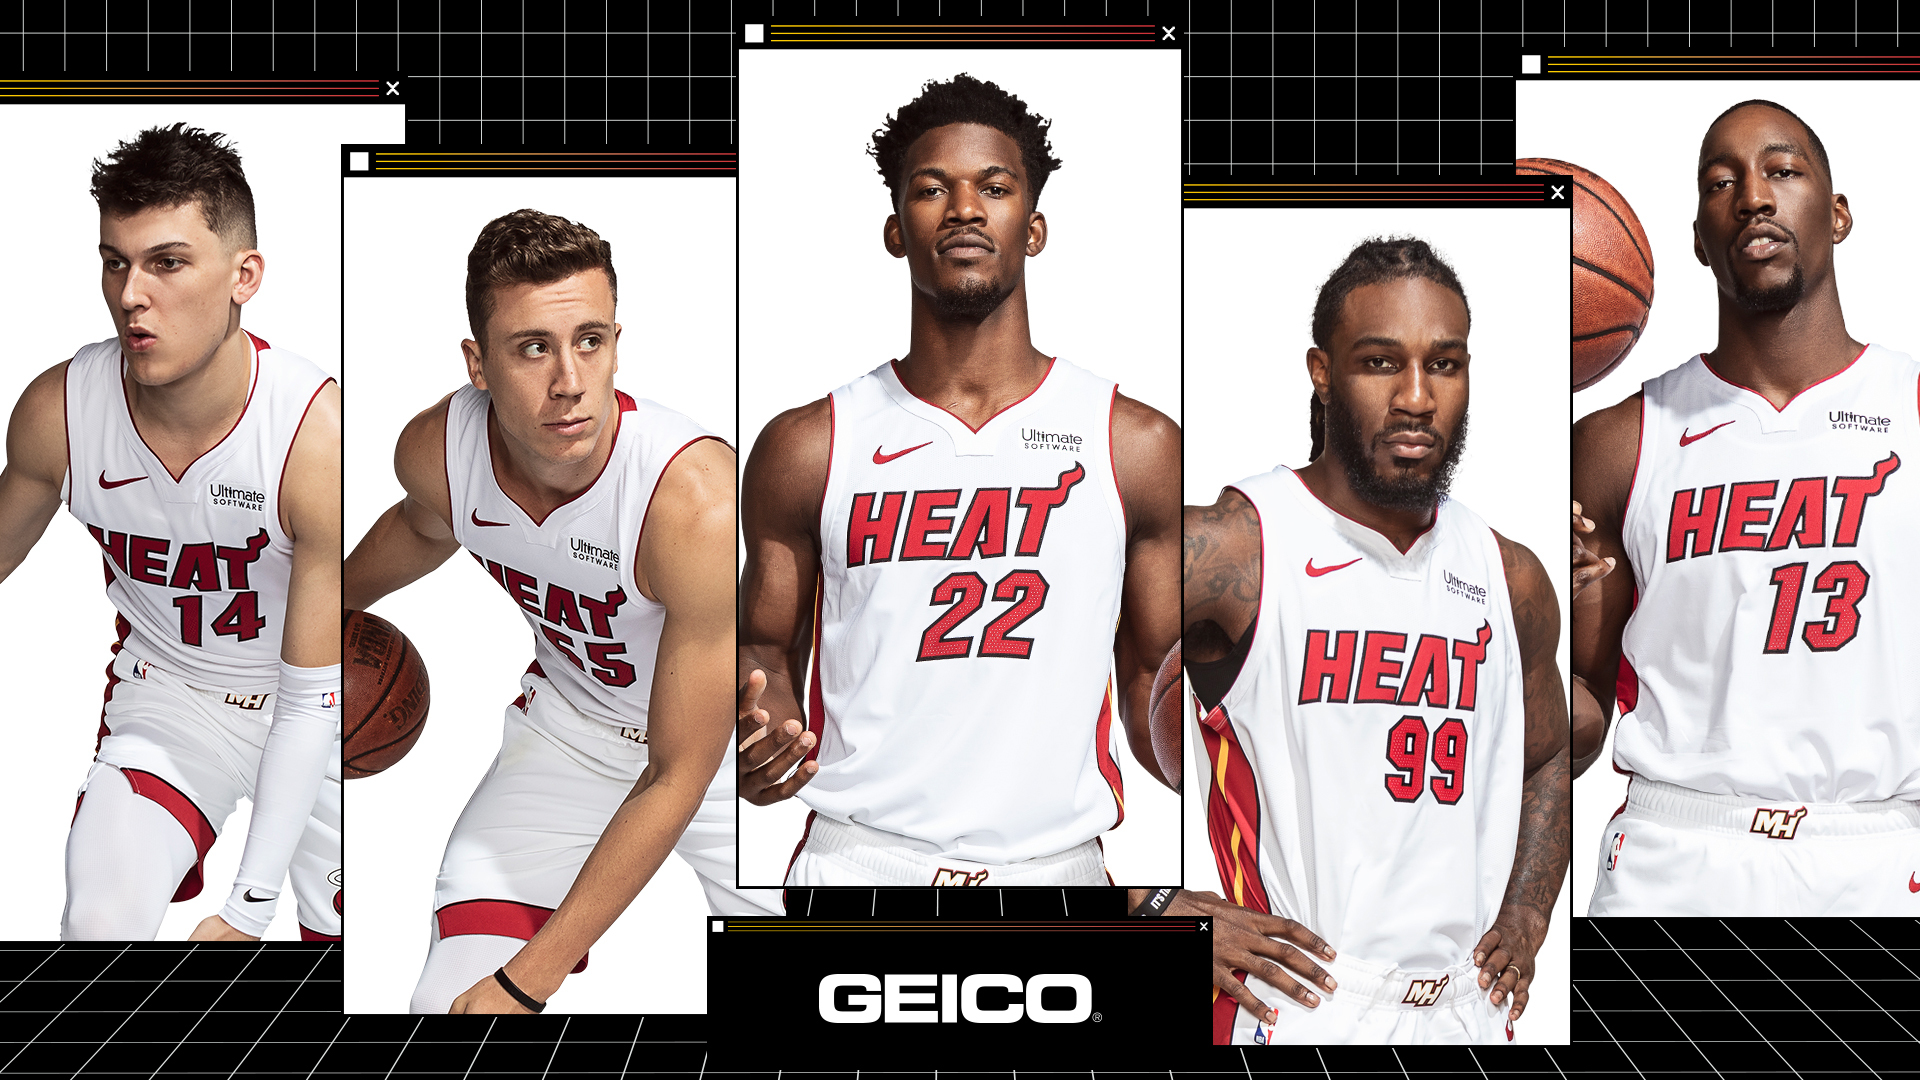 Miami HEAT on X: Never before has a uniform had this much HEAT